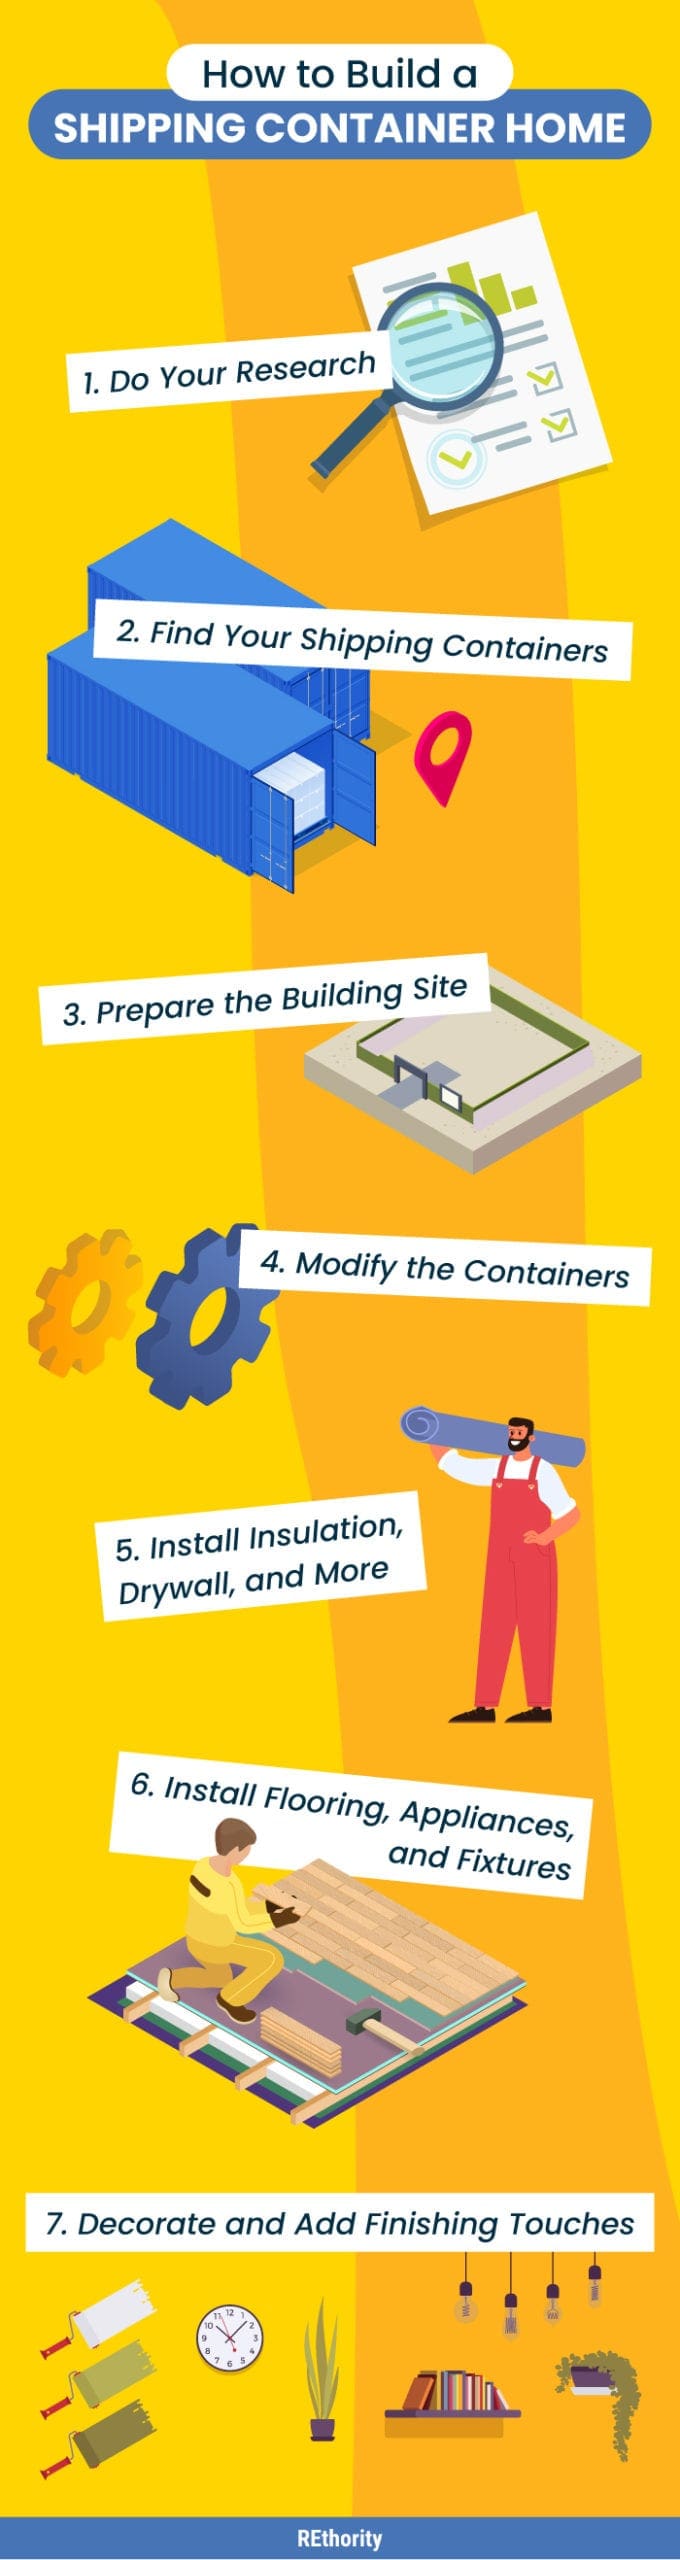 An infographic showing how to build a shipping container home in a step-by-step guide